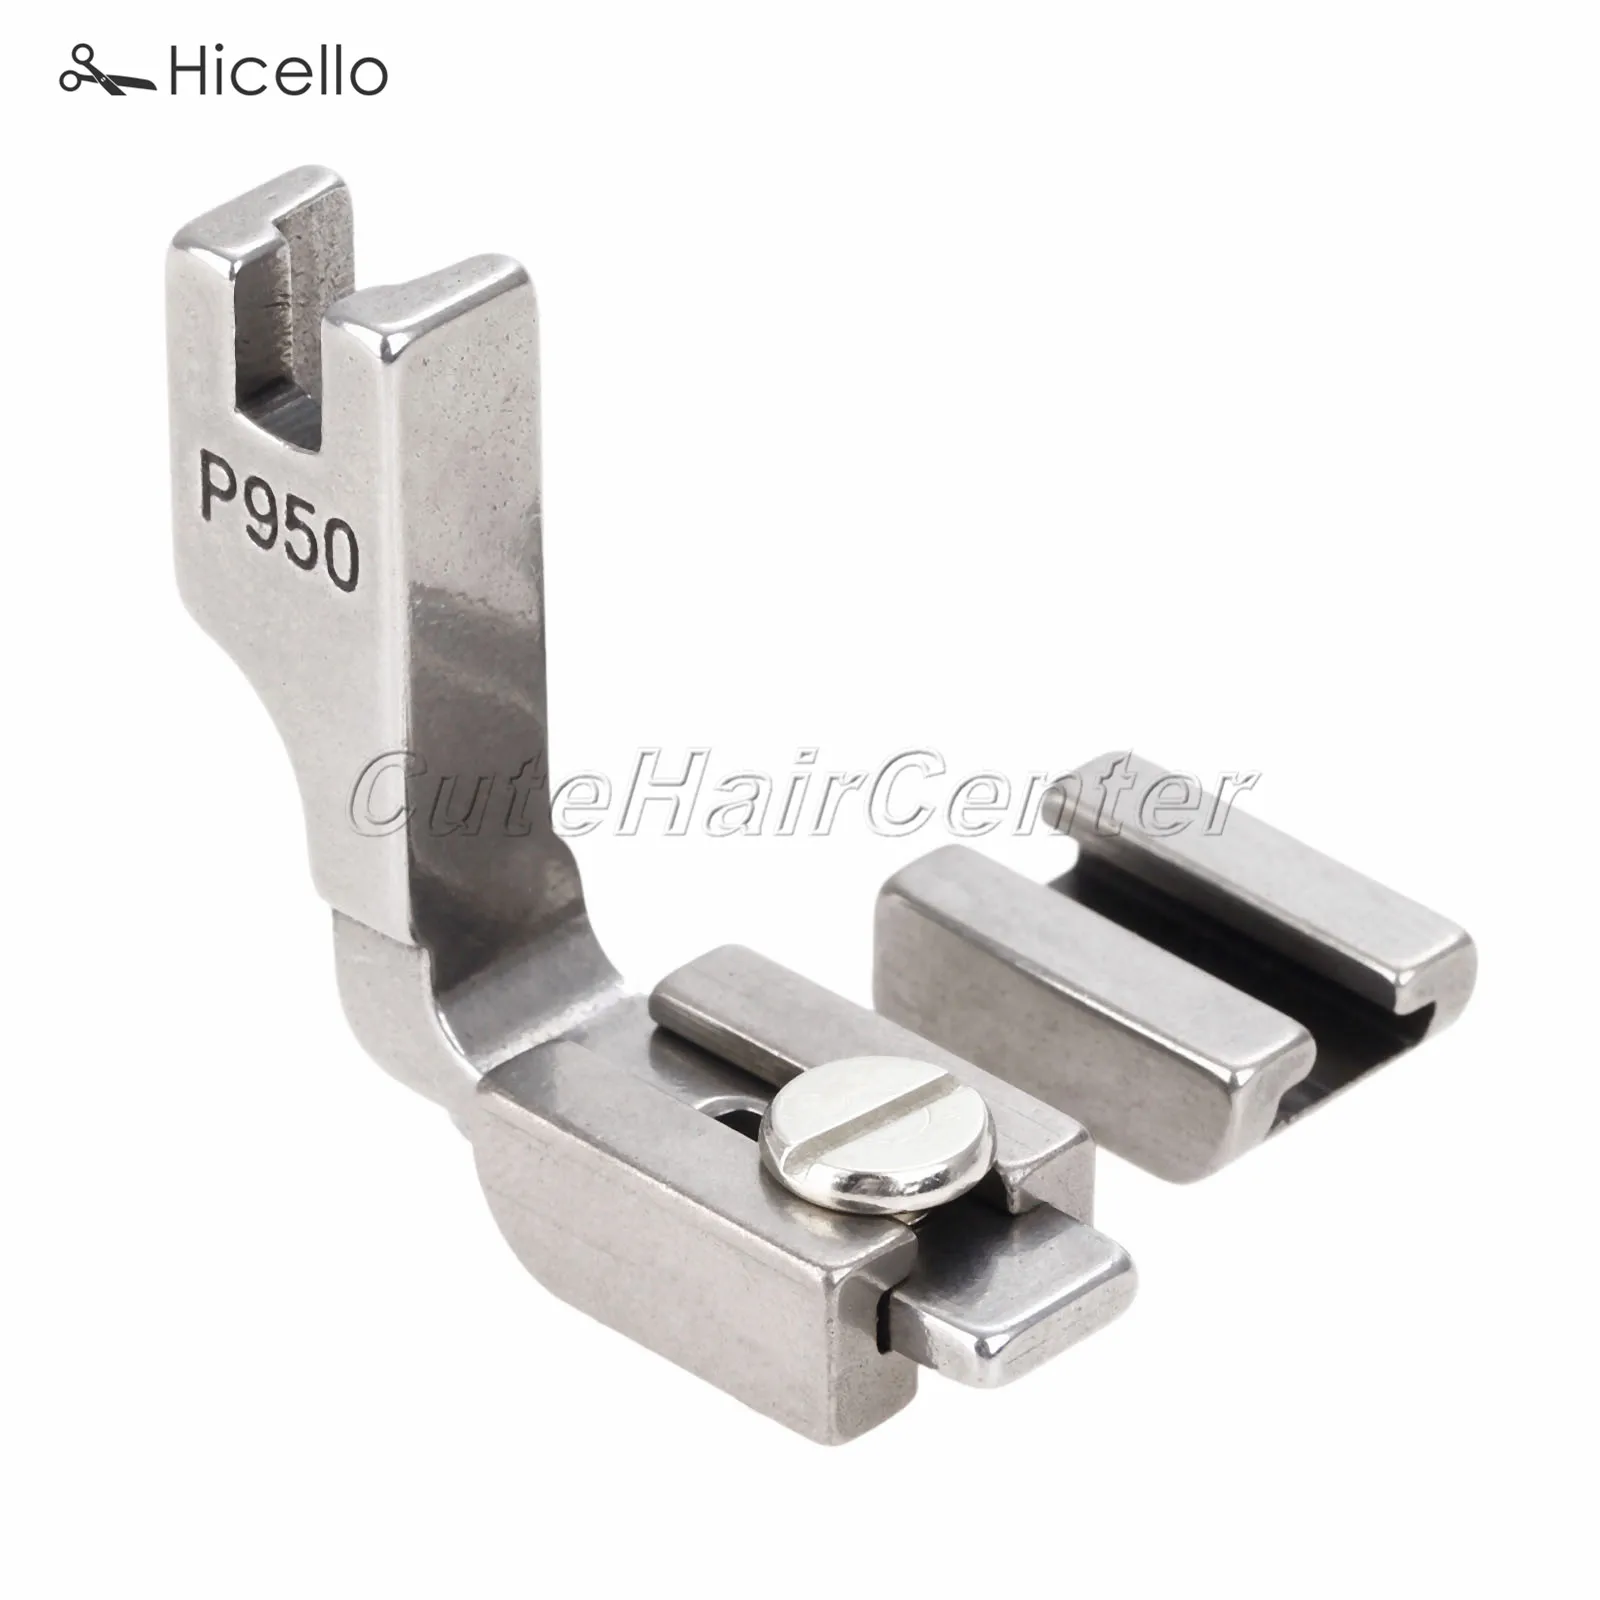 

Shirring Presser Foot P950 No.S950 Industrial Sewing machine Steel Sew Machine Accessory Professional Wrinkles Shrink Hicello